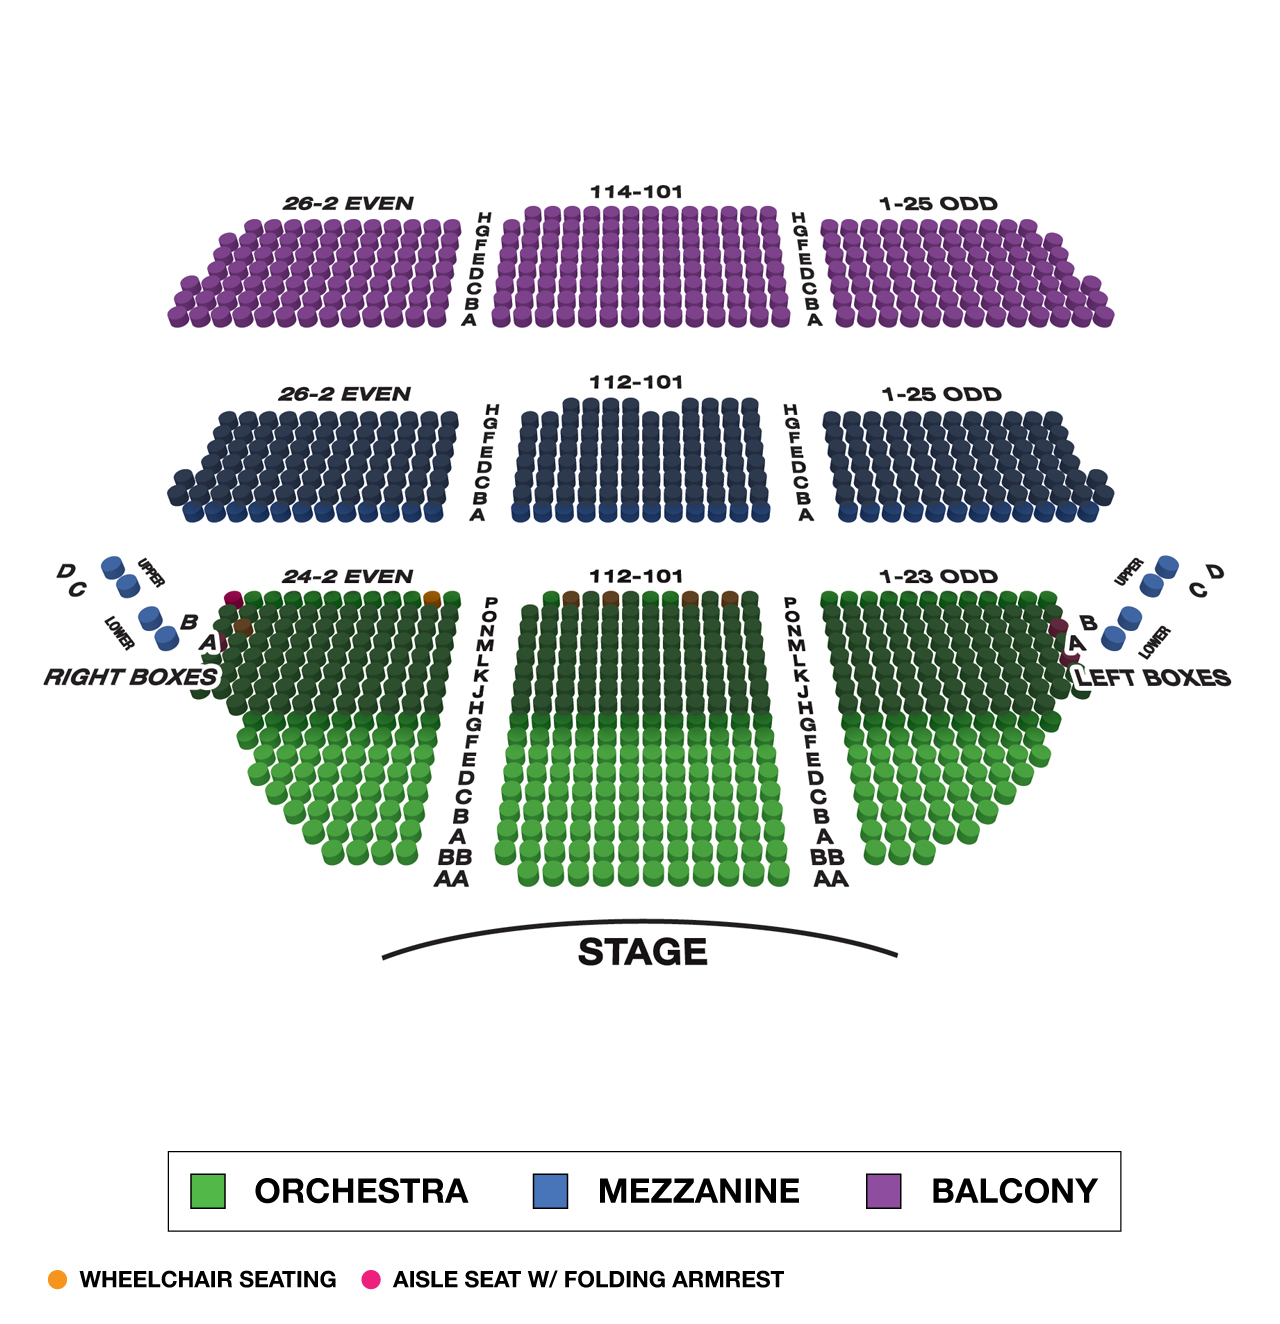 Cort Theatre Large Broadway Seating Charts